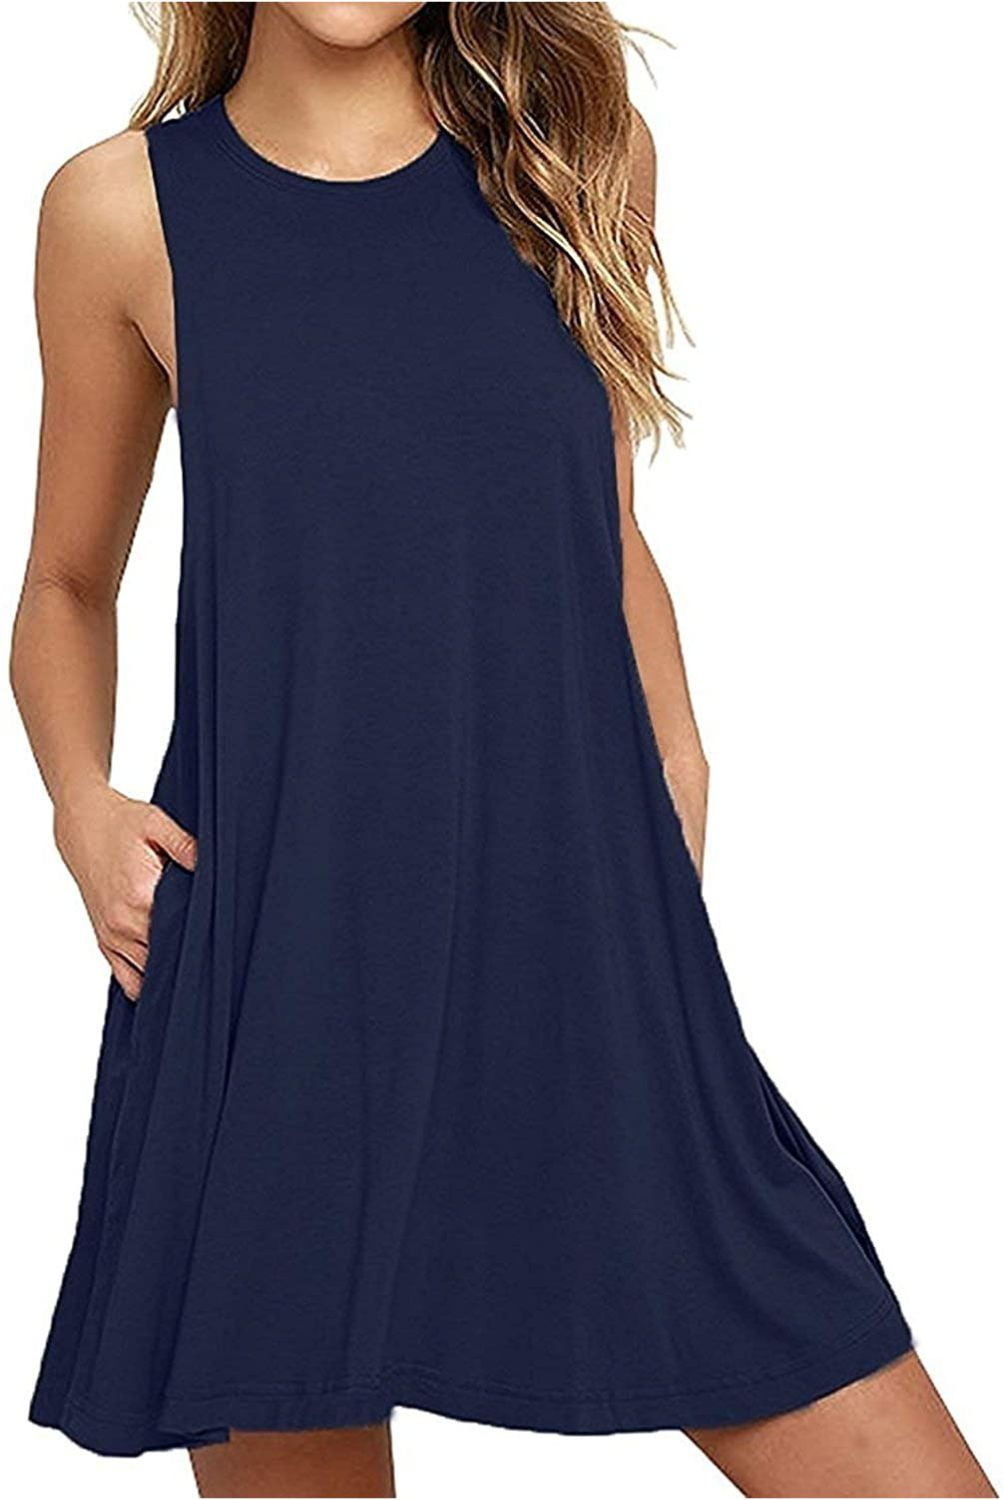 model in a casual sleeveless navy dress standing, partial view